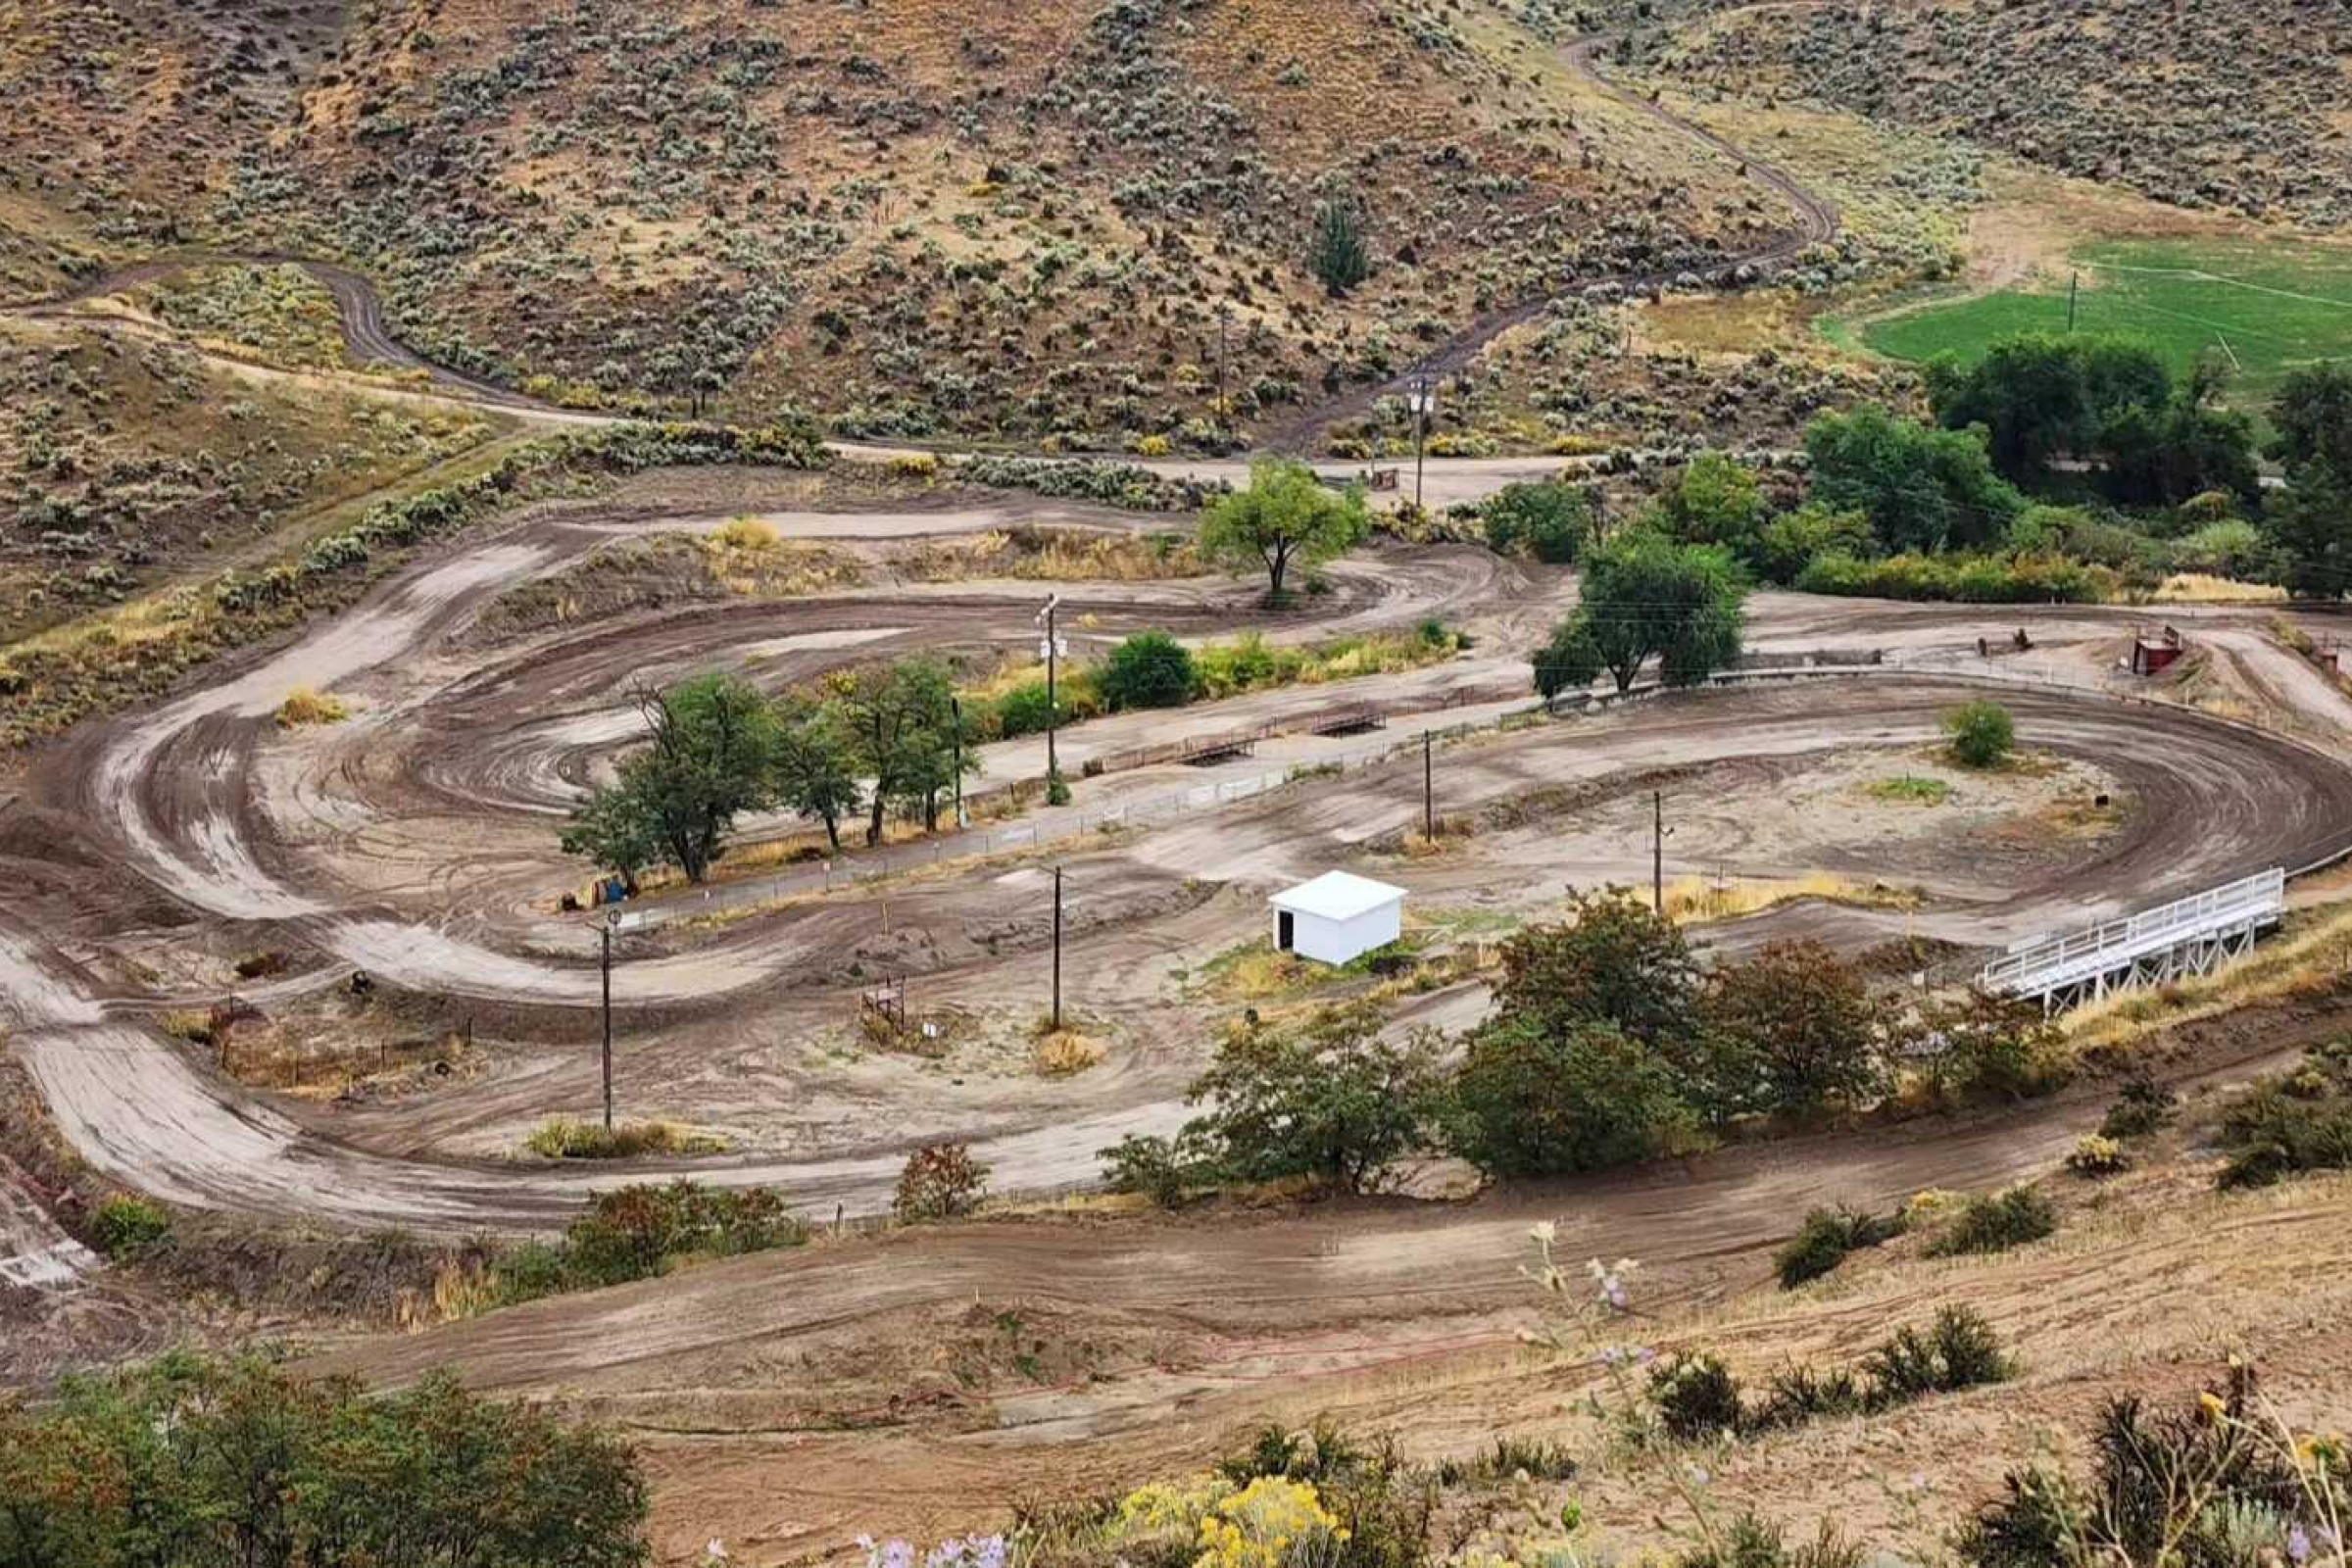 Owyhee Motorcycle Club Searching for Funding to Keep 80-Acre Facility Open  - Racer X